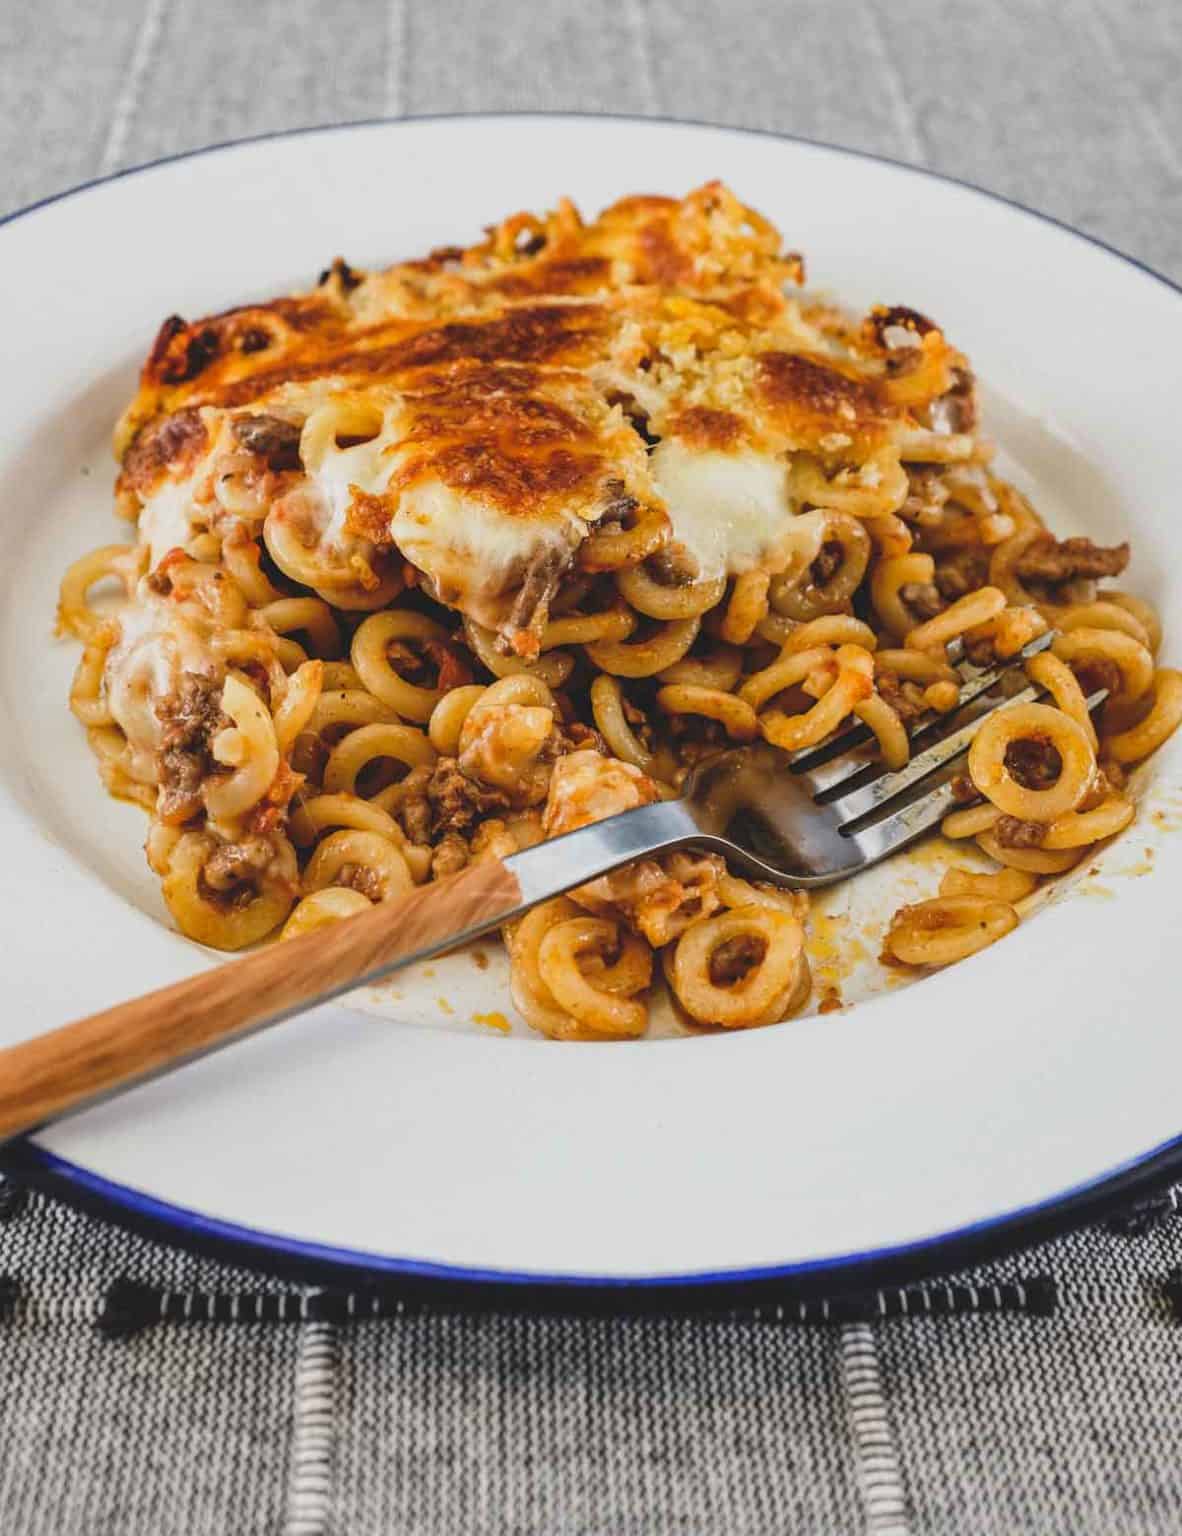 Anelletti Al Forno Oven Baked Pasta Rings Cook Eat World